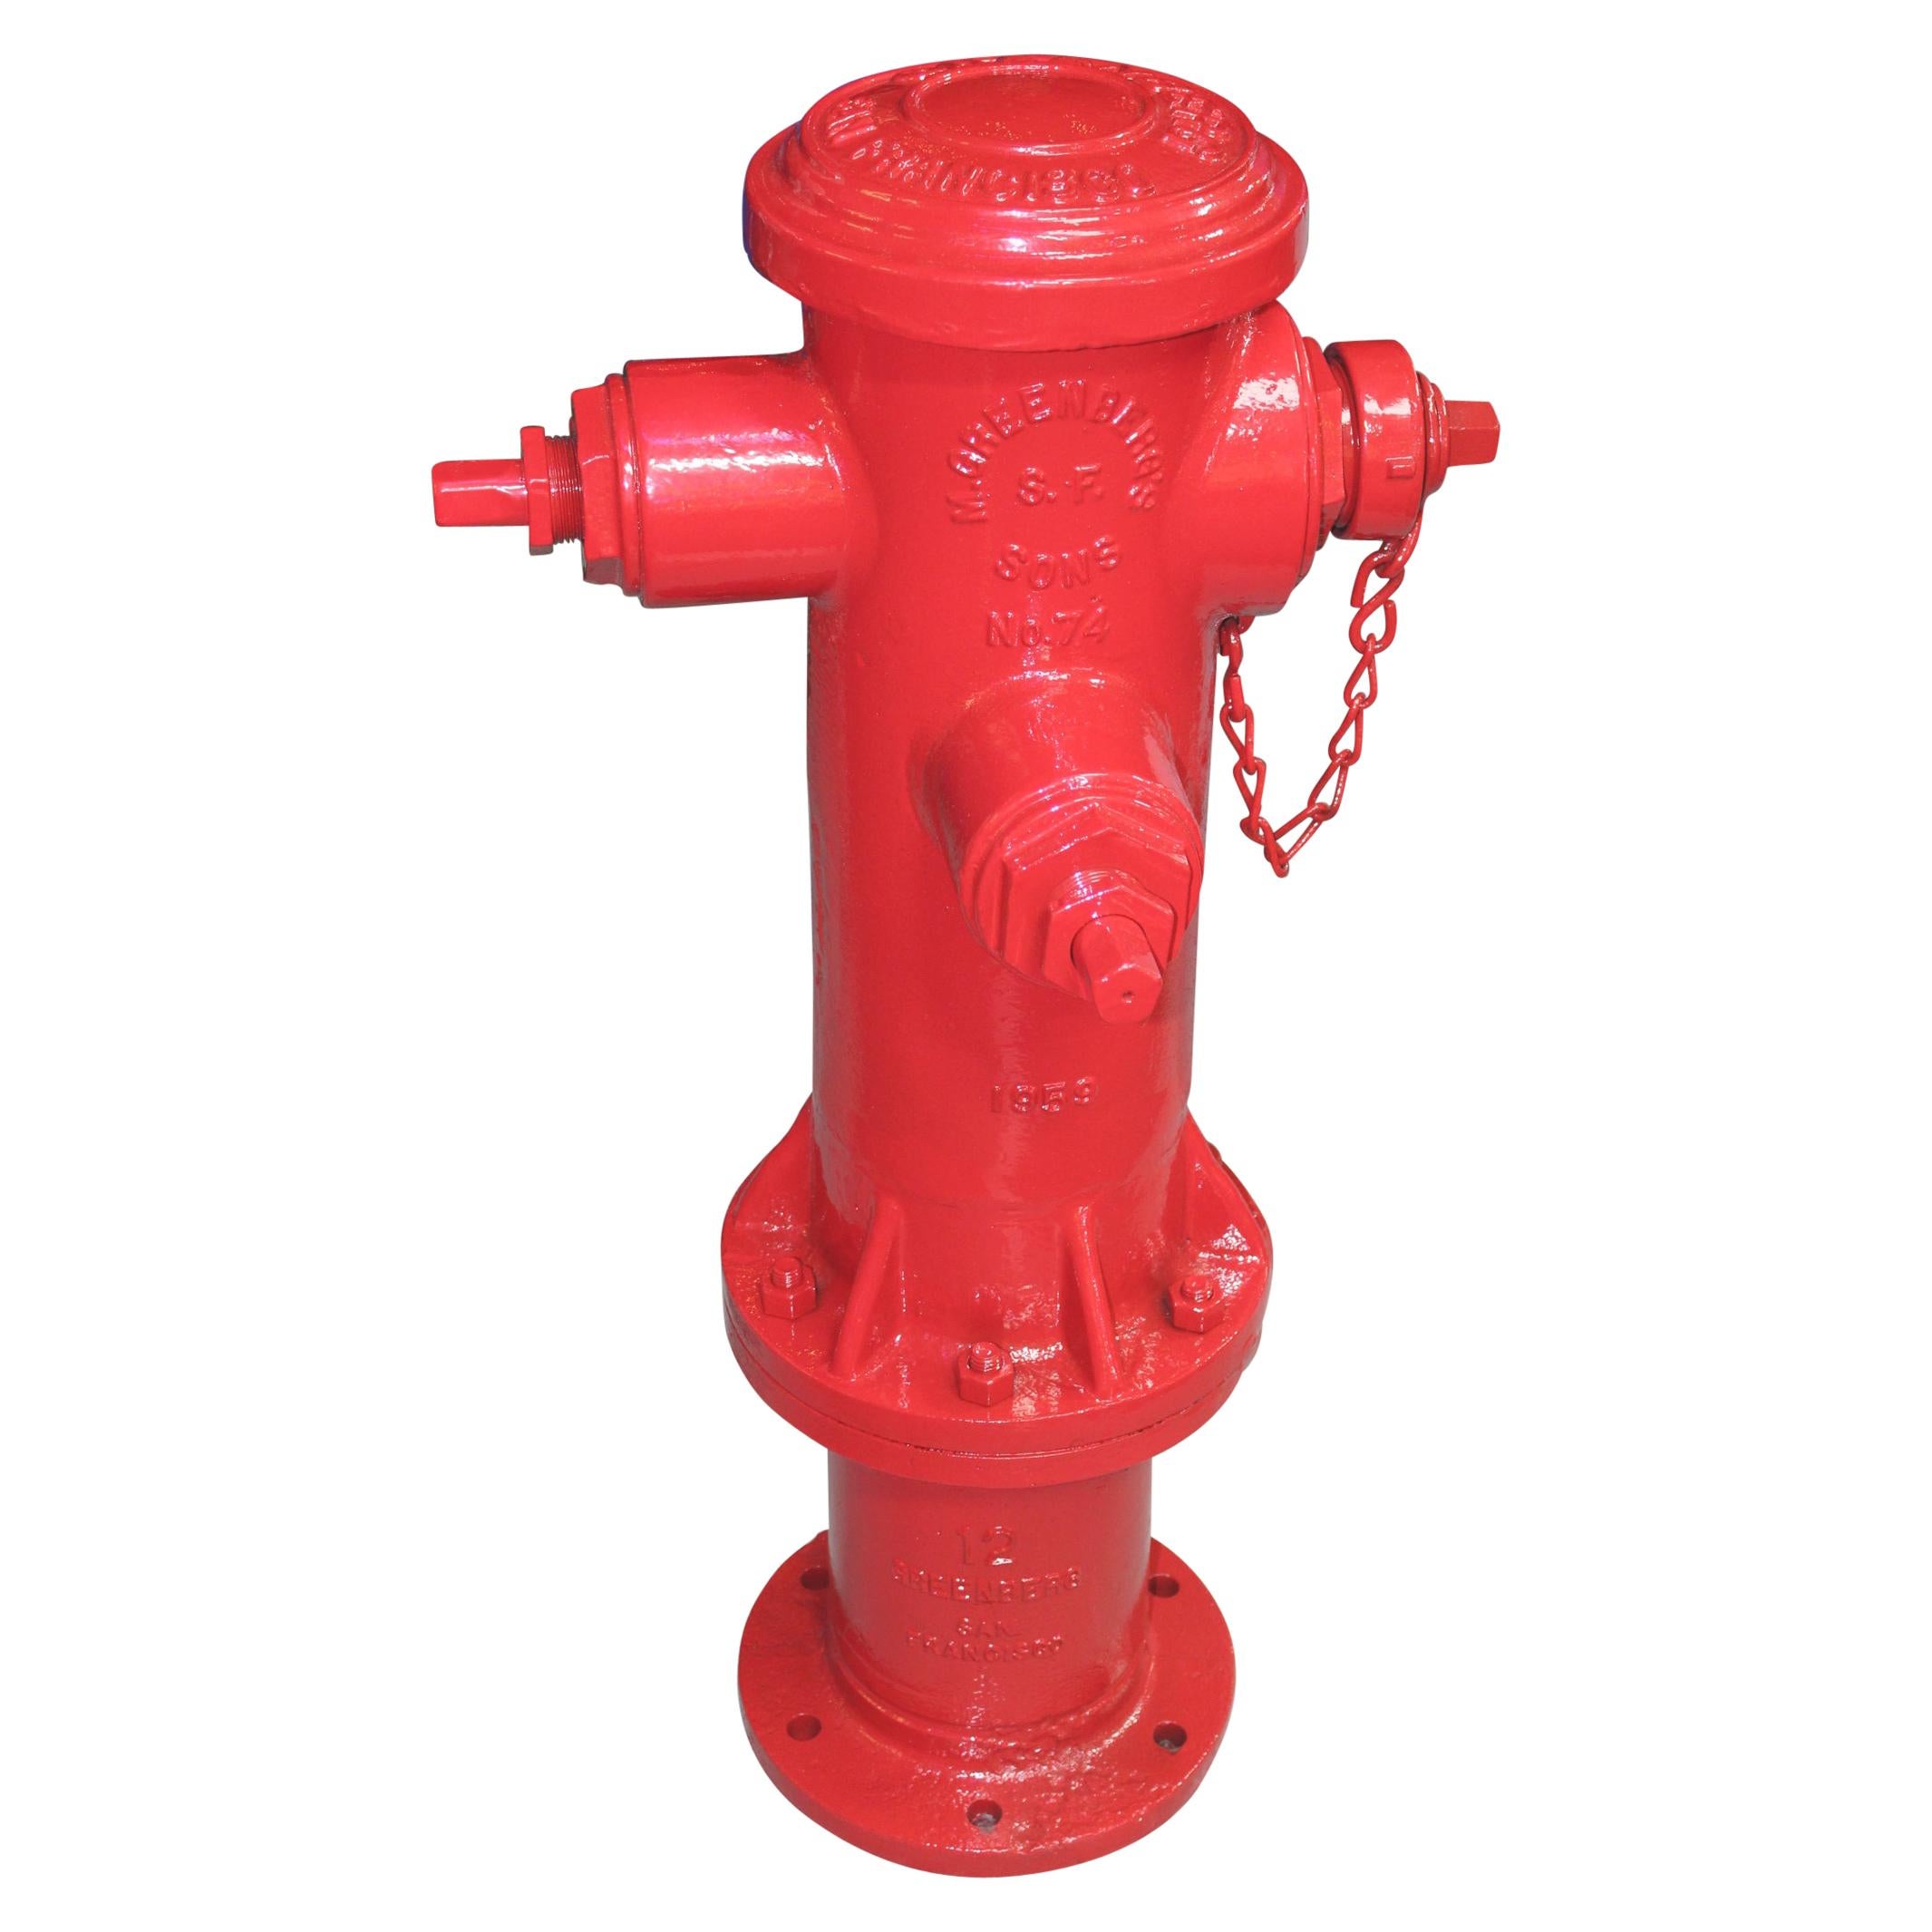 1959 M. Greenberg's Sons Fire Hydrant For Sale